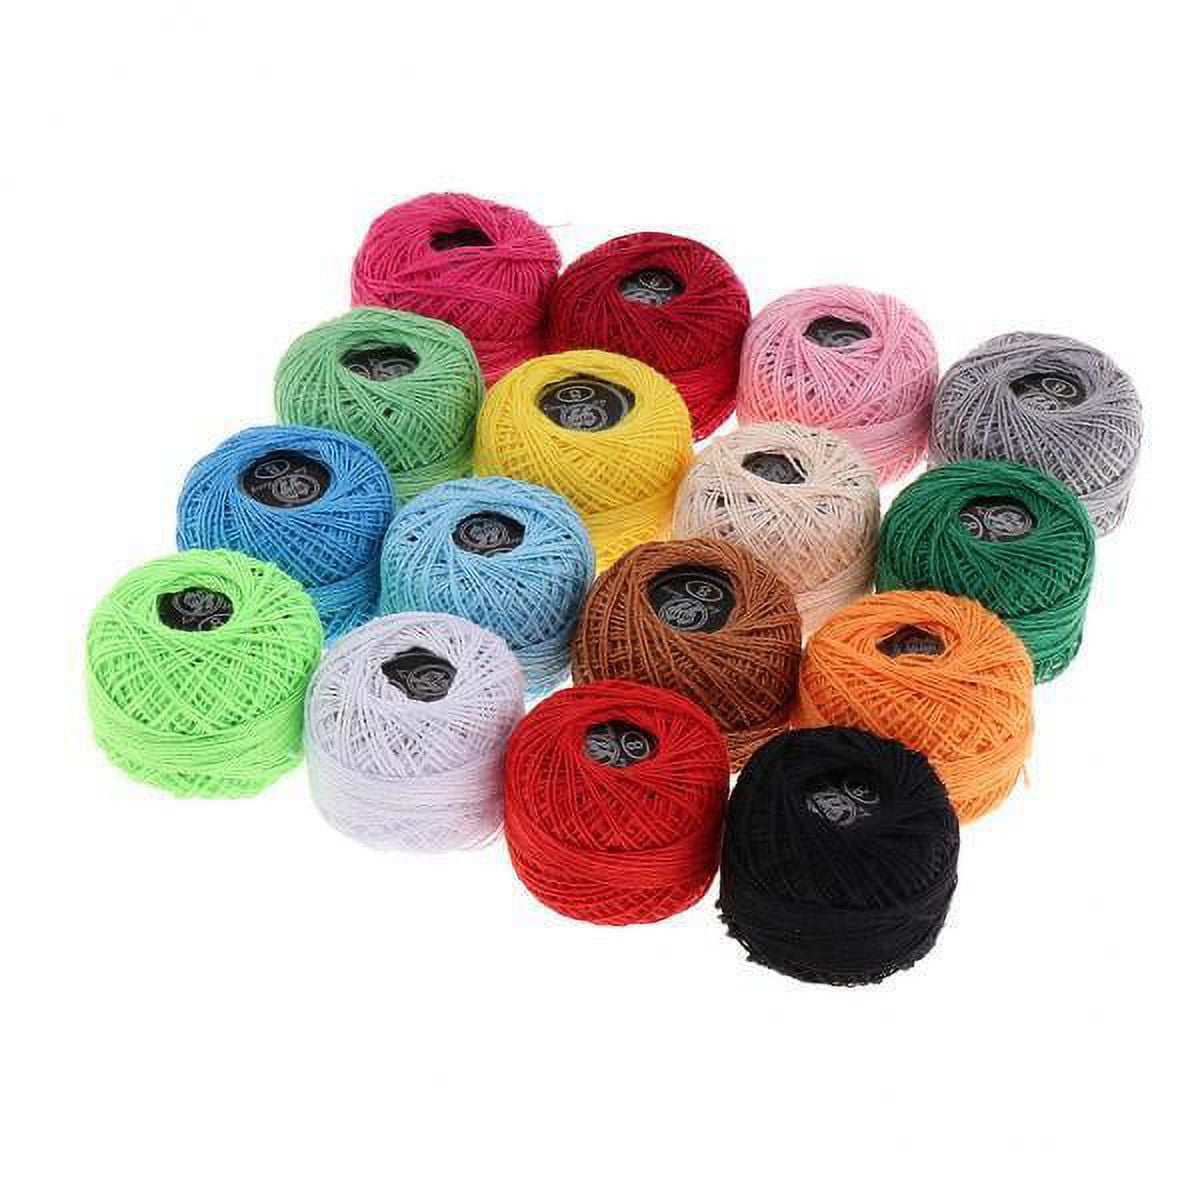 Fdit Lace Thread Colorful Hand Made DIY Knitting Crochet Stitch